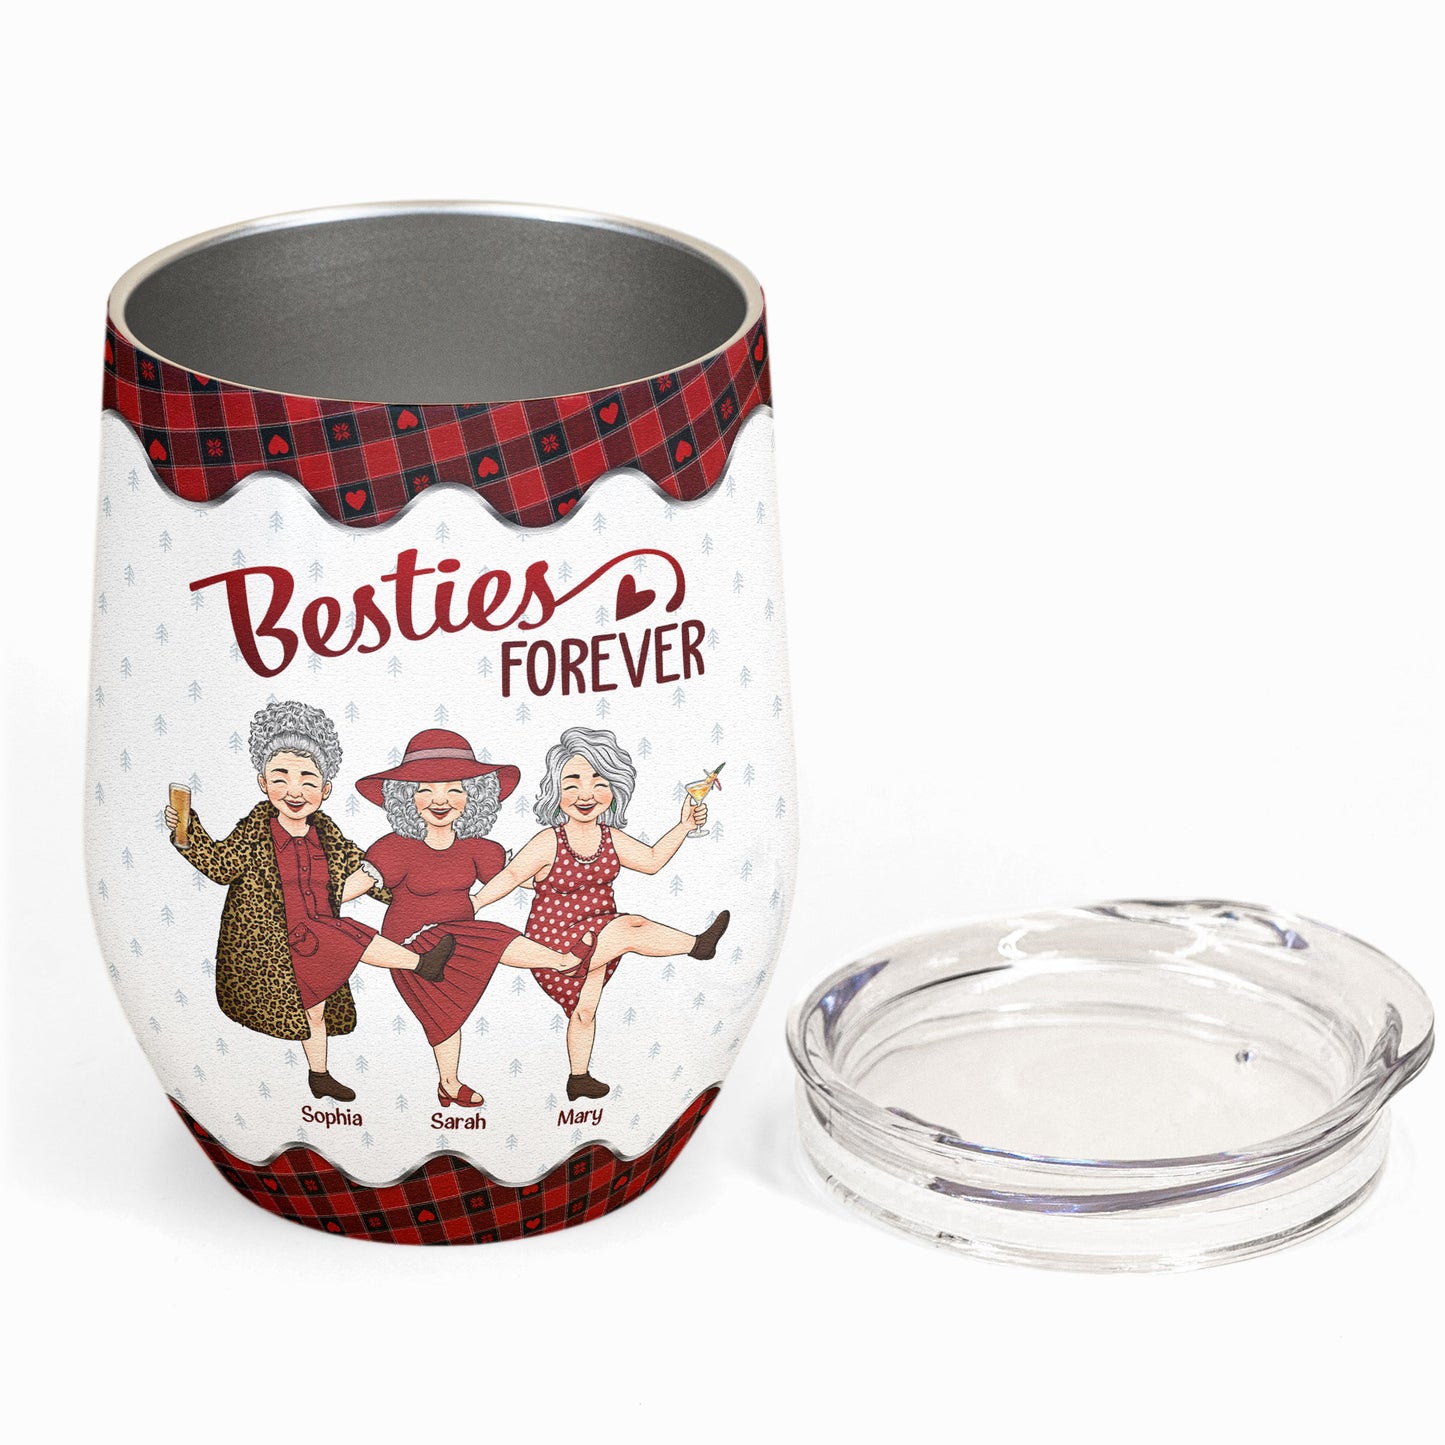 Here's To Another Year Of Bonding Over Alcohol - Personalized Wine Tumbler